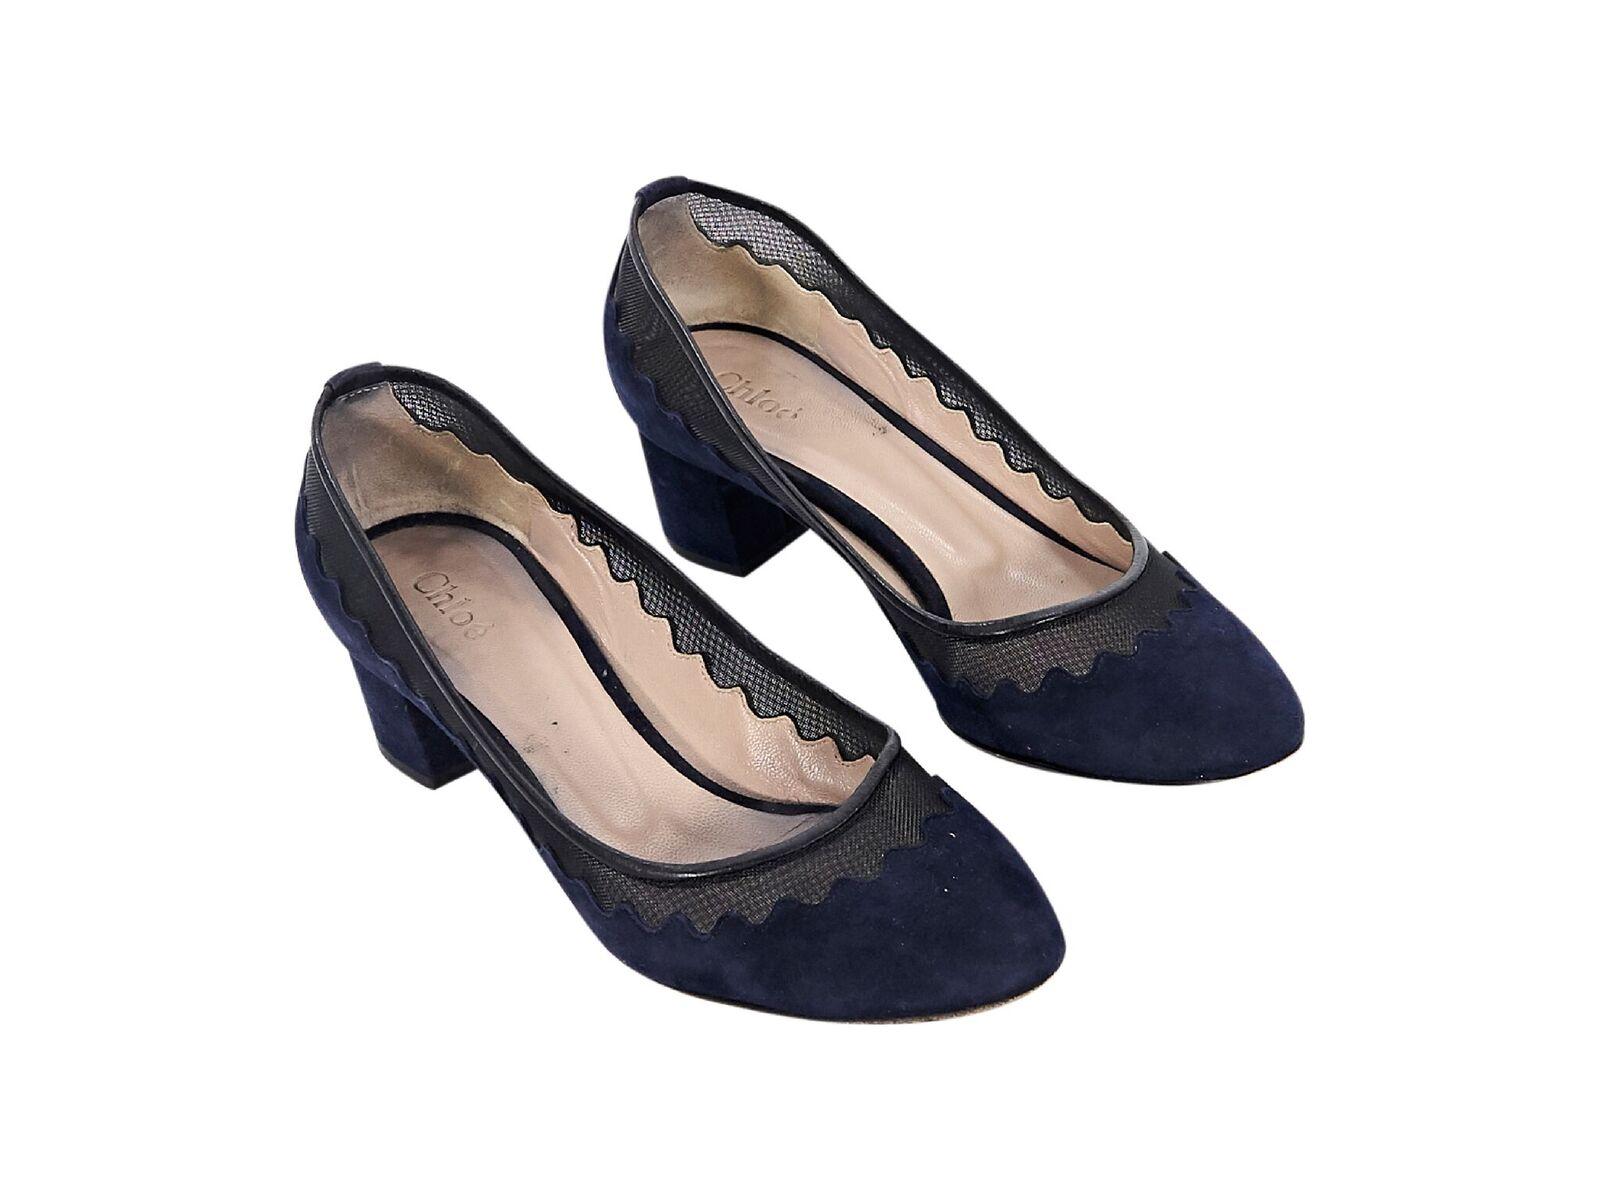 Product details:  Navy blue suede and mesh kitten heels by Chloe.  Signature scalloped detail.  Round toe.  Slip-on style.  EU size 35.5.  1.5